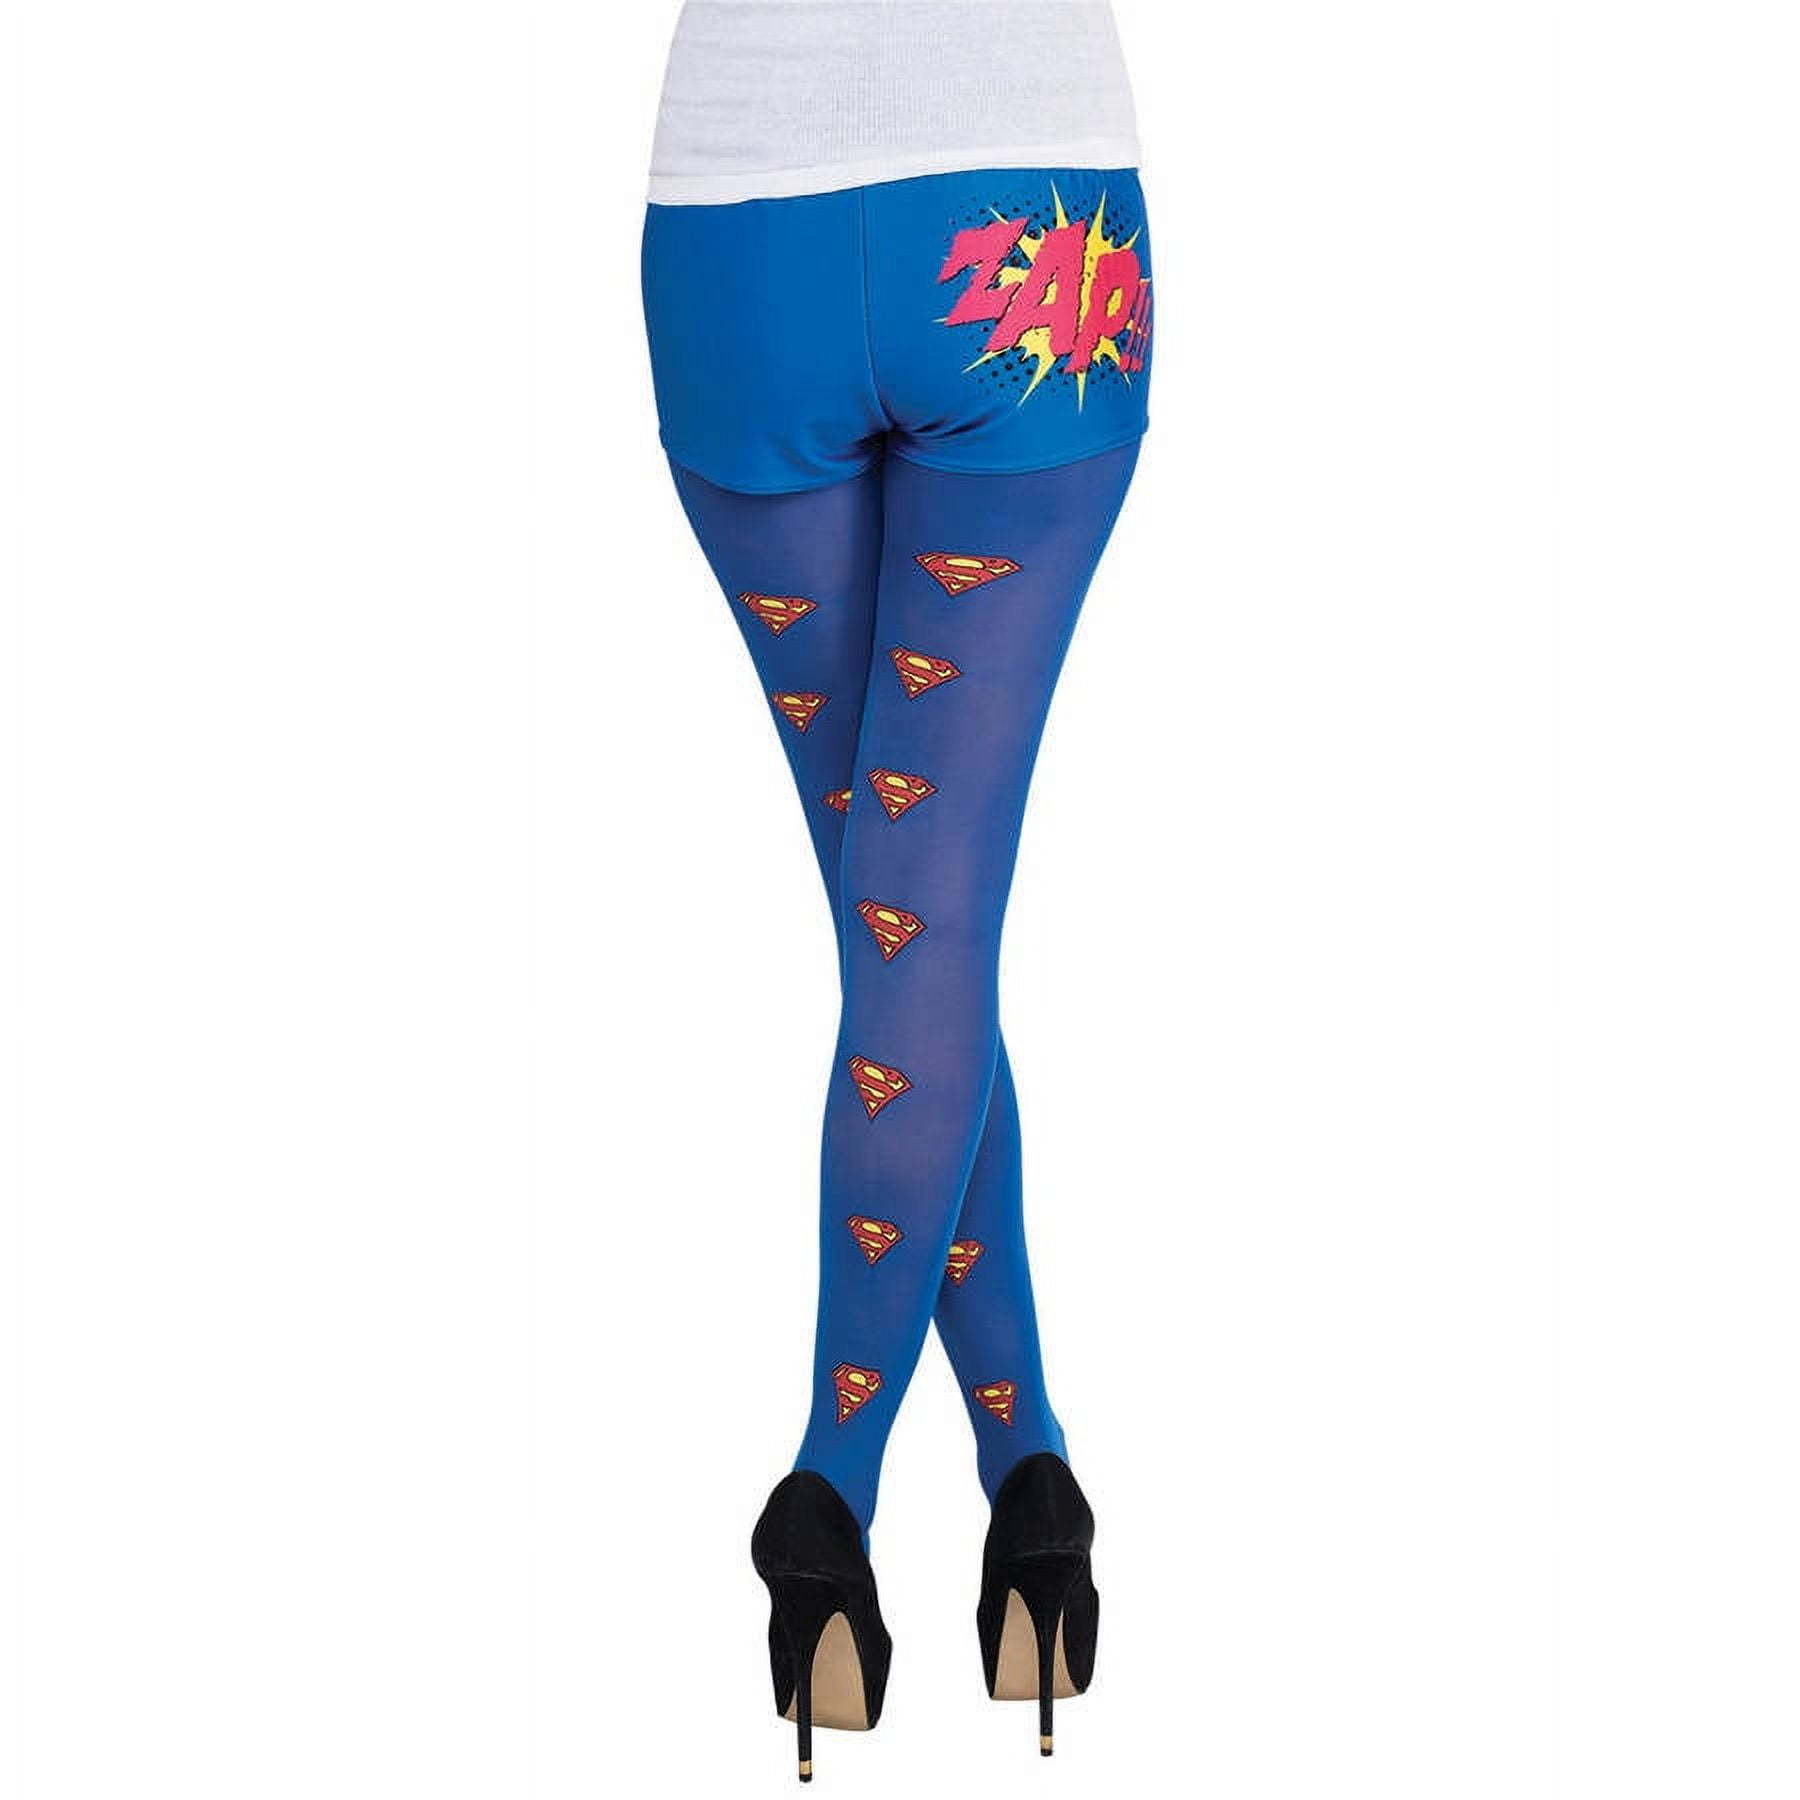 Supergirl Womens Tights Halloween Costume Accessory 